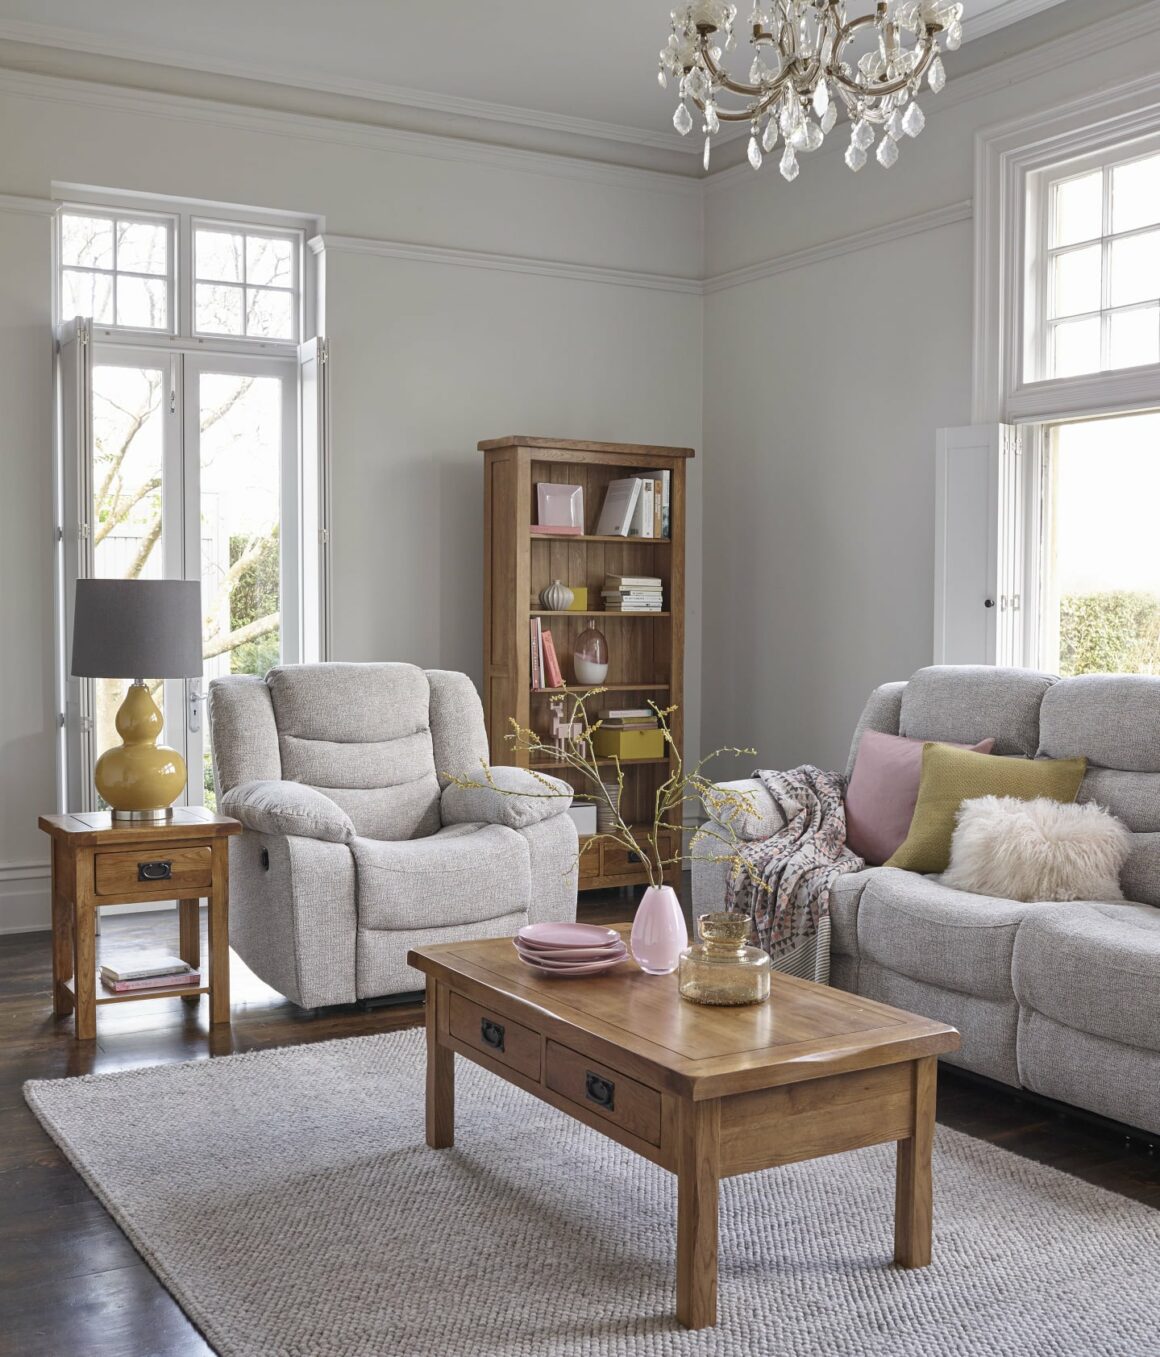 How To Mix And Match Your Living Room Furniture